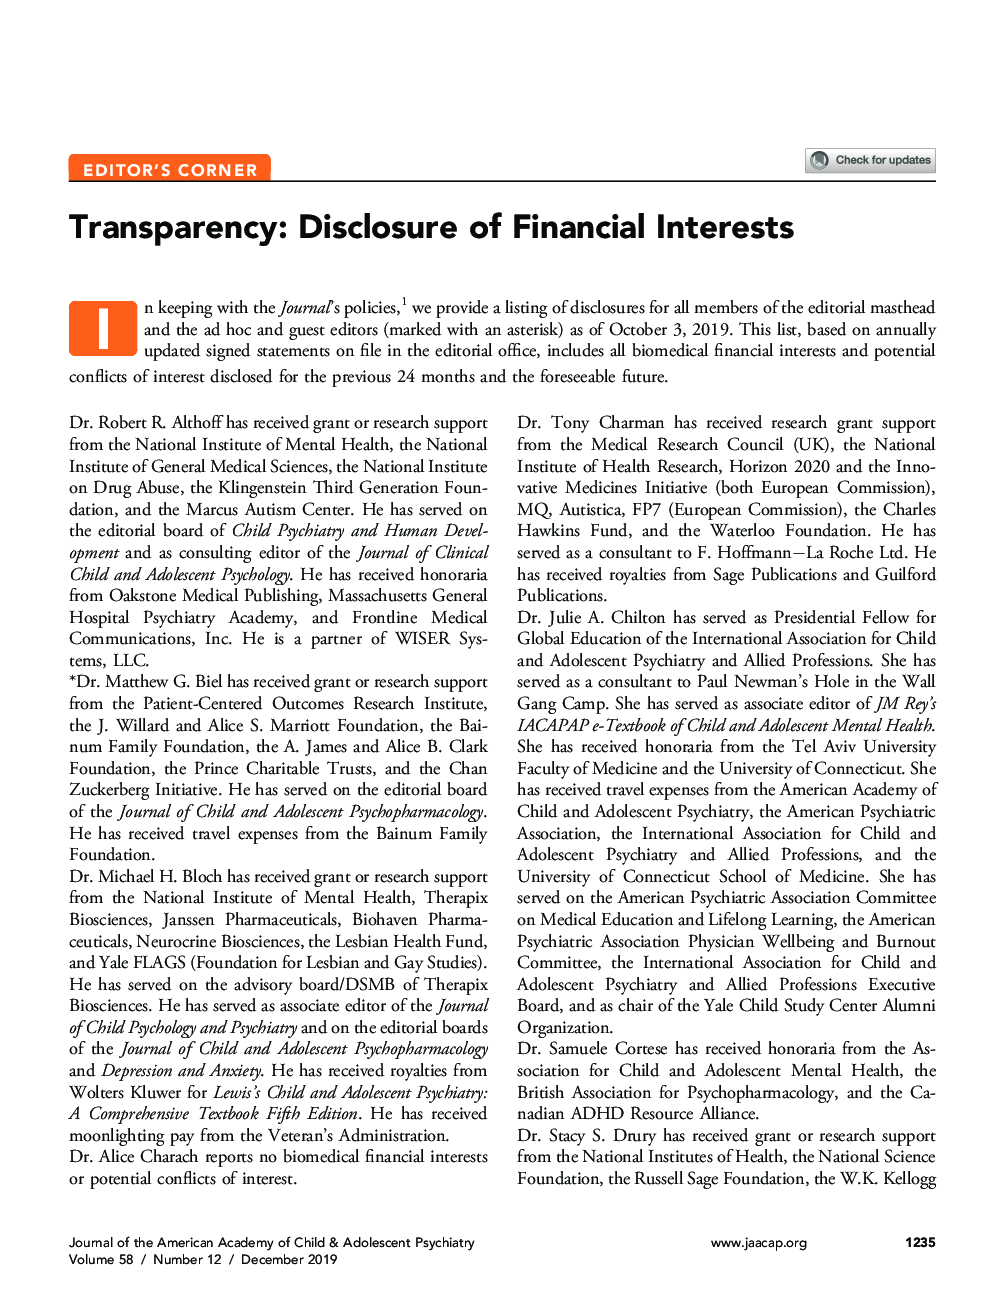 Transparency: Disclosure of Financial Interests